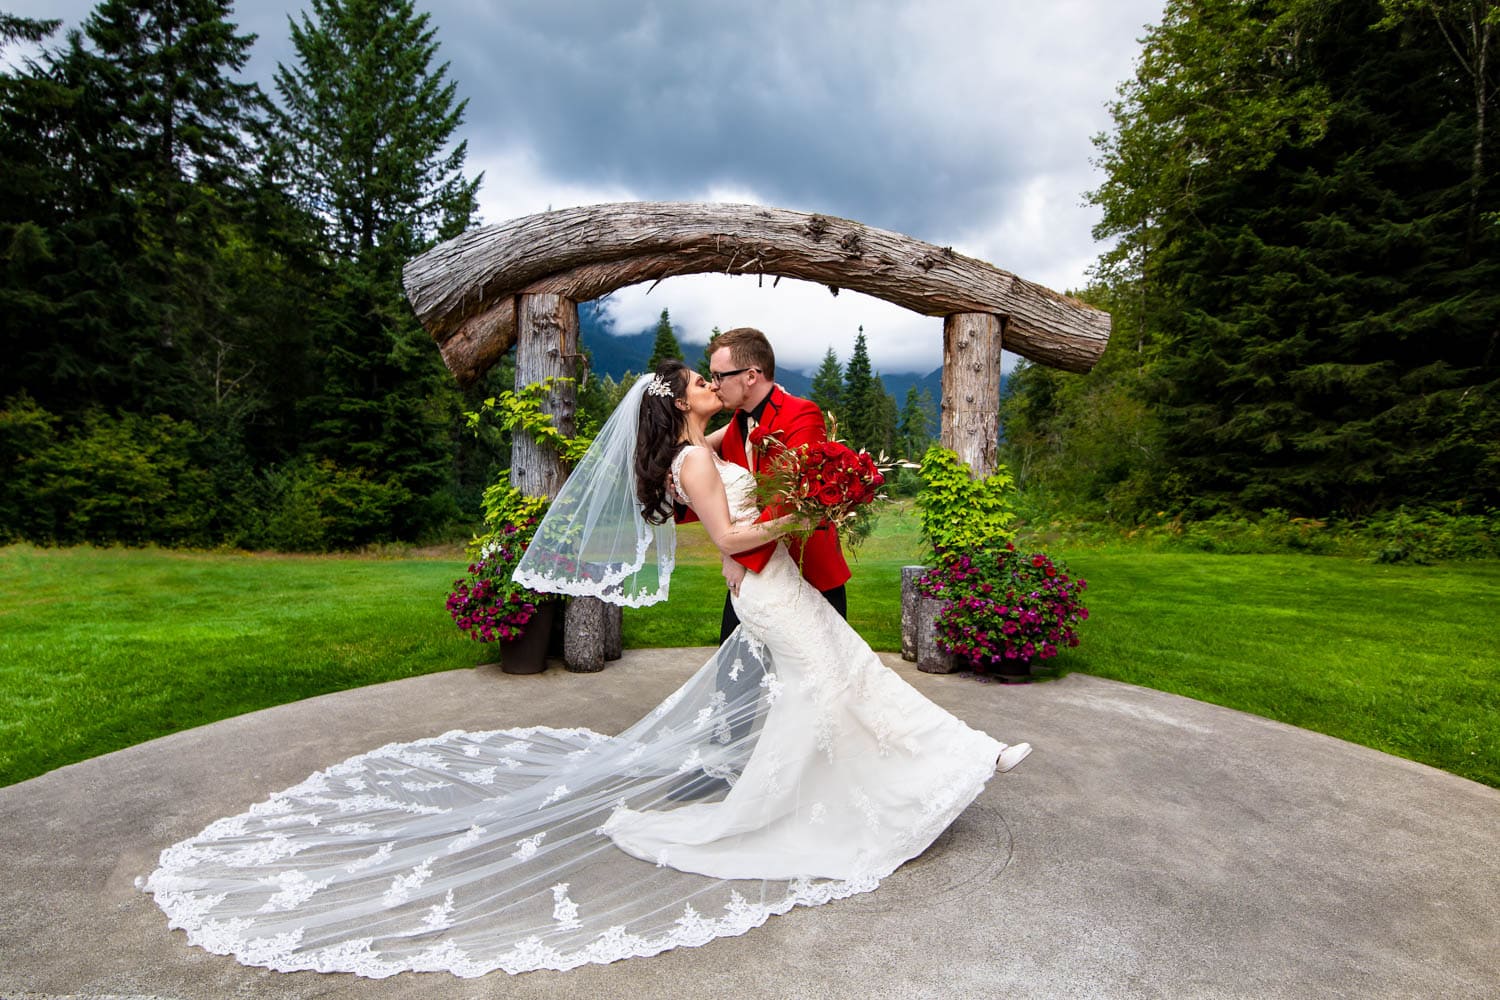 Bride and Groom kiss in front of the wedding arch at Nisqually Winds Mountain House near Mt. Rainier.